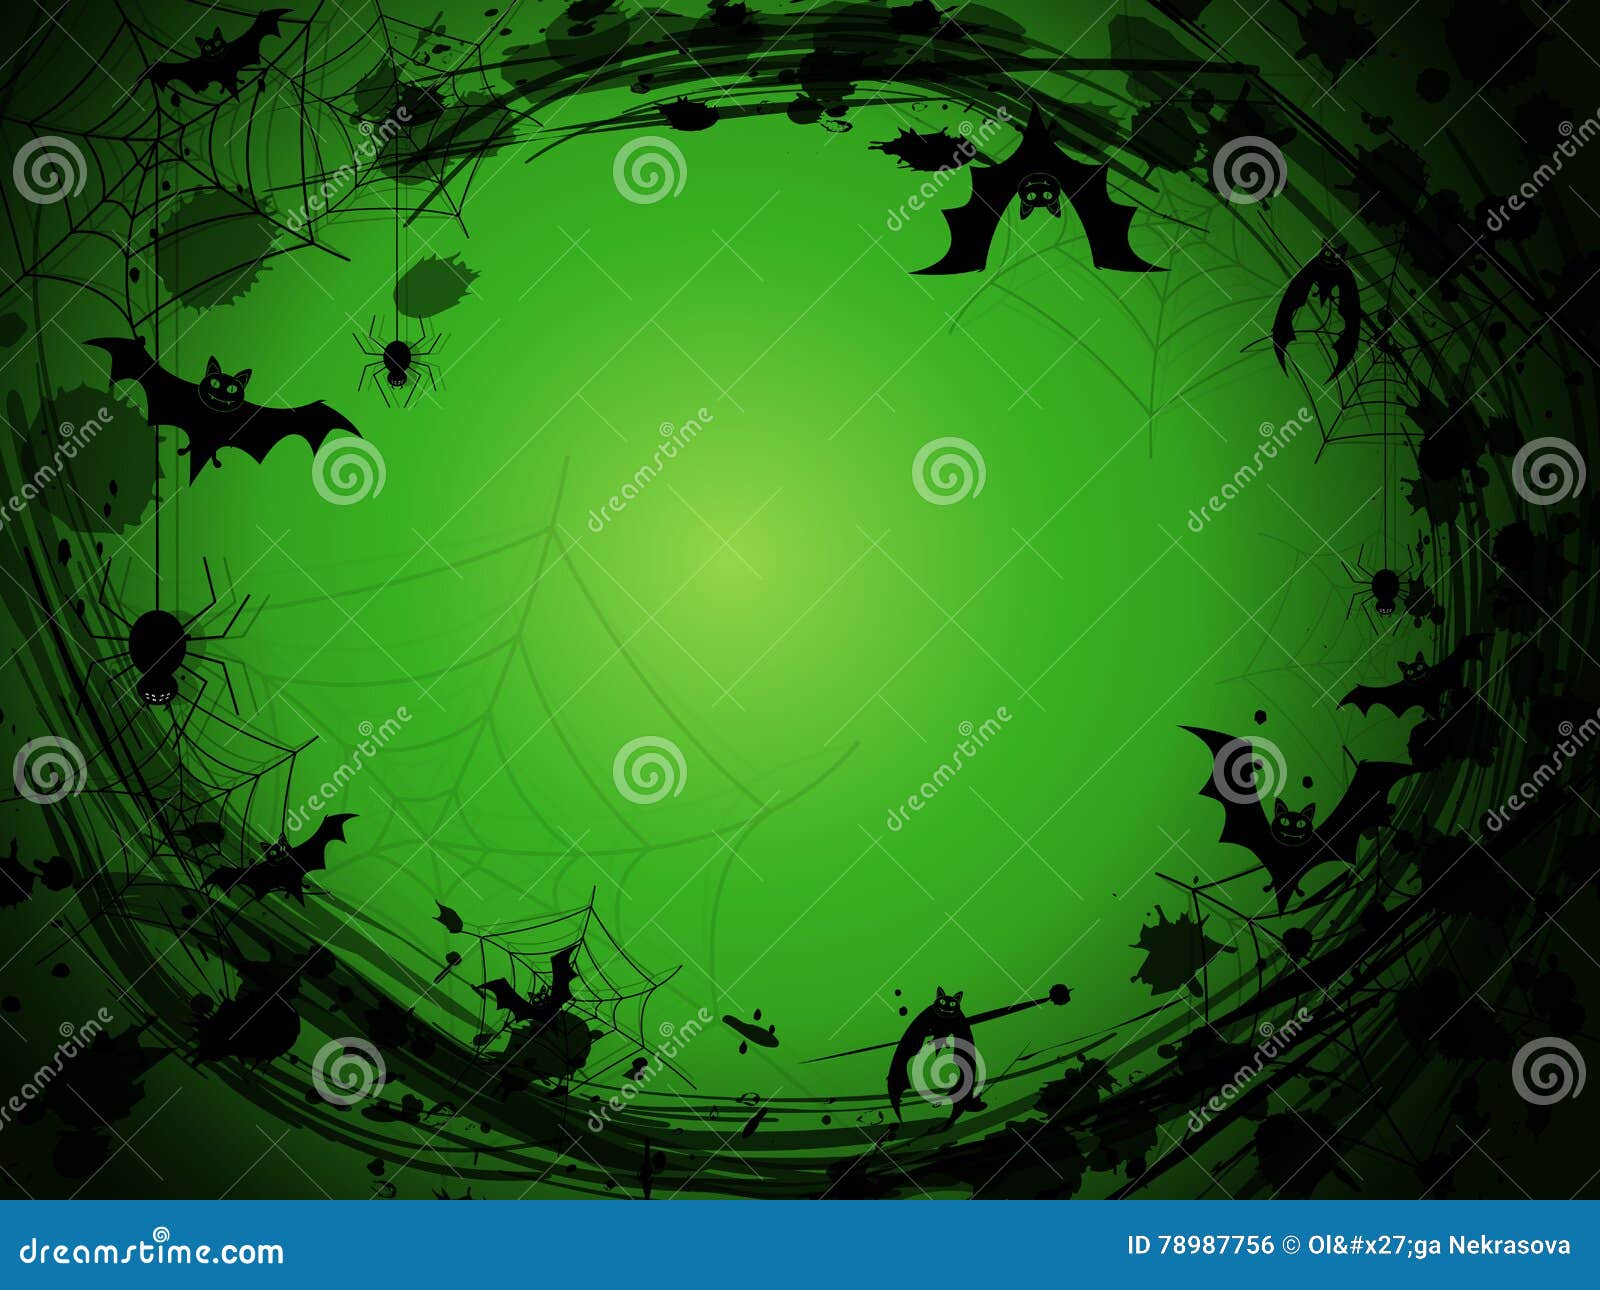 Halloween Green Background with Black Spider Webs, Spiders, Bats and Blobs  Stock Vector - Illustration of backdrop, death: 78987756